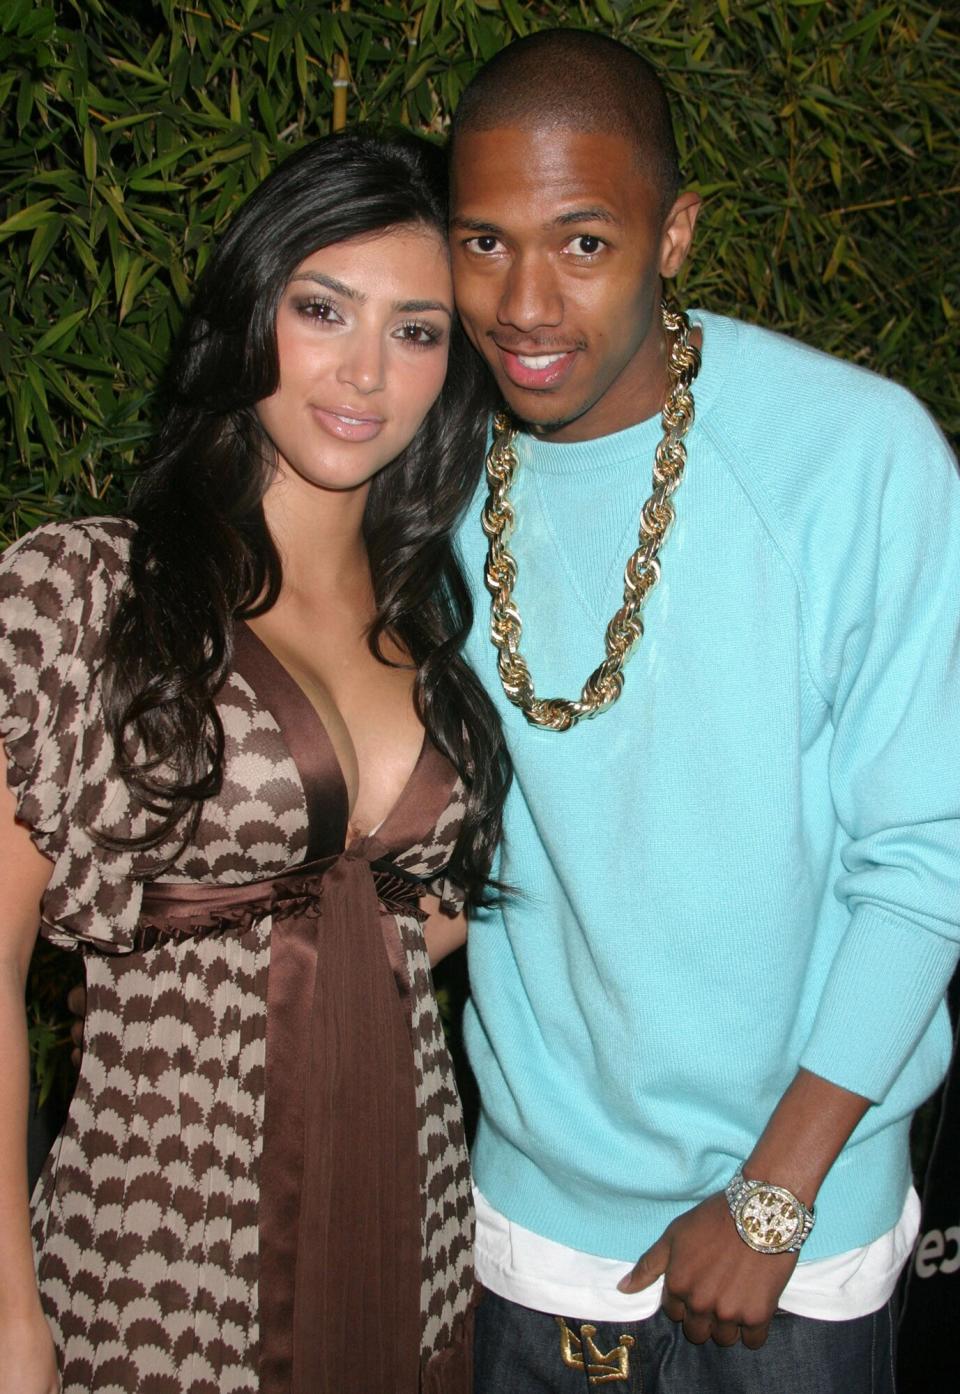 Kim Kardashian and Nick Cannon during Launch of "Hollywood Covered" Magazine and Niki Shadrow's Birthday at Falcon in West Hollywood, California, United States